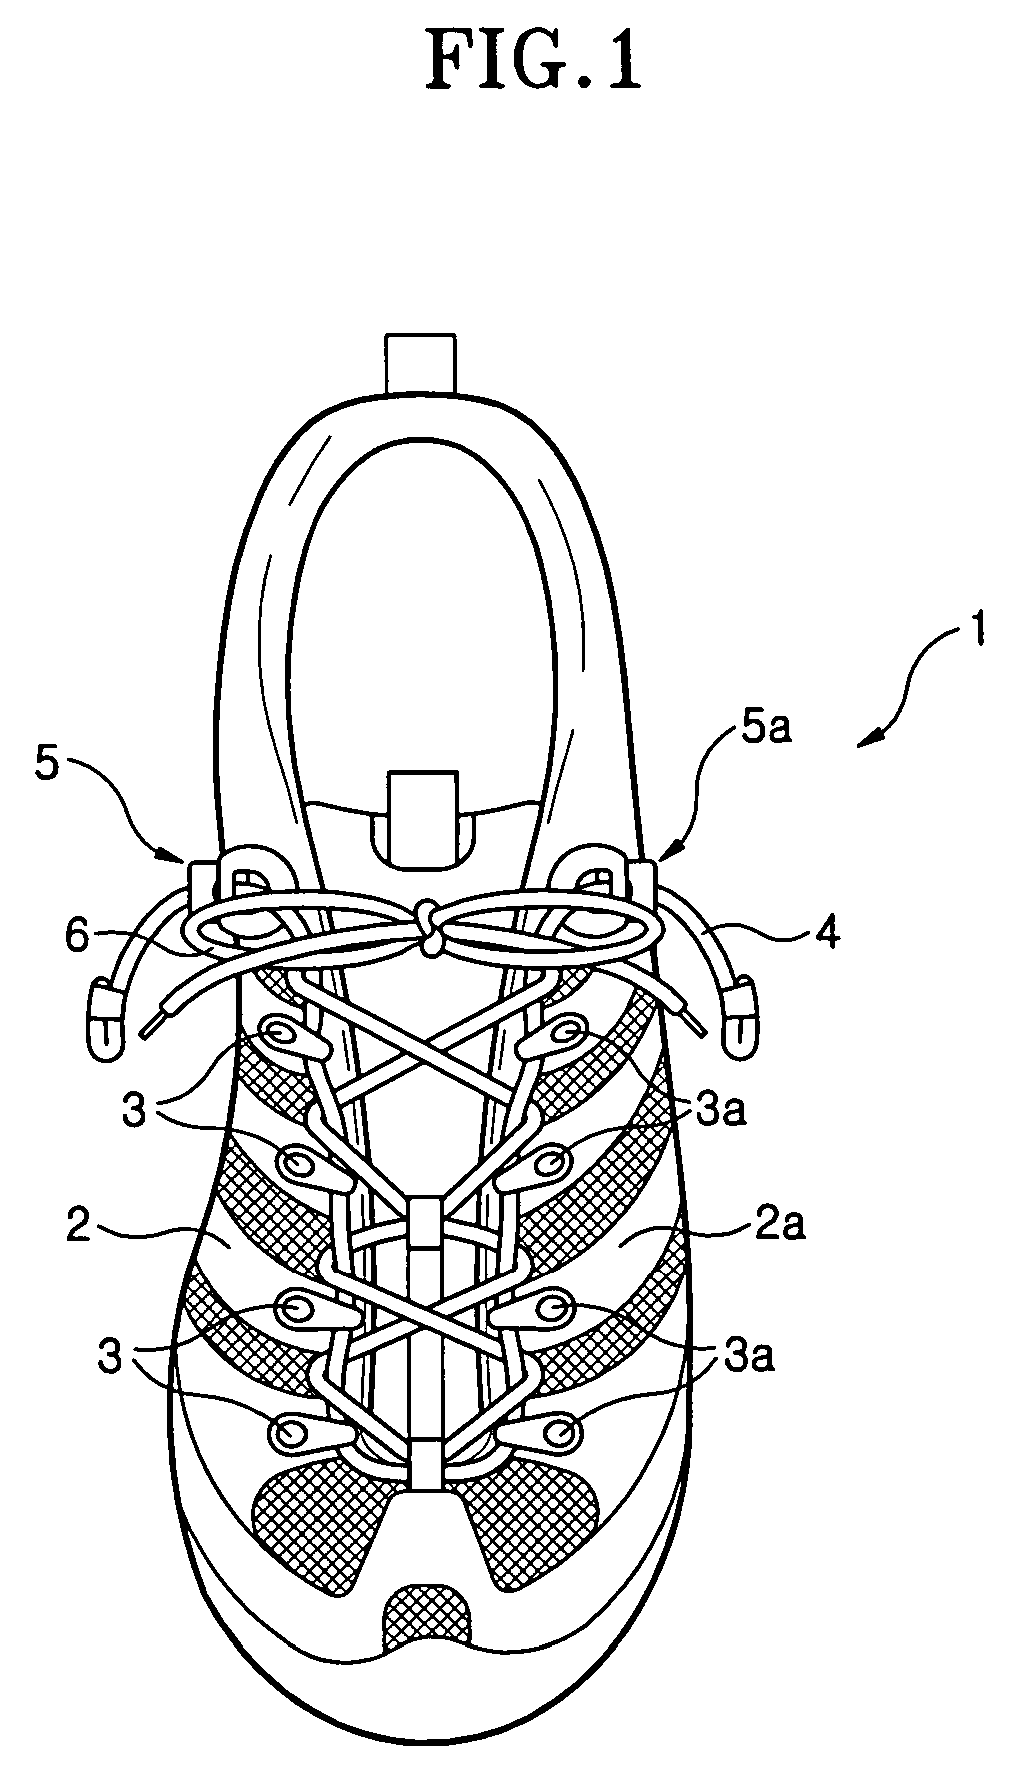 Shoelace tightening structure